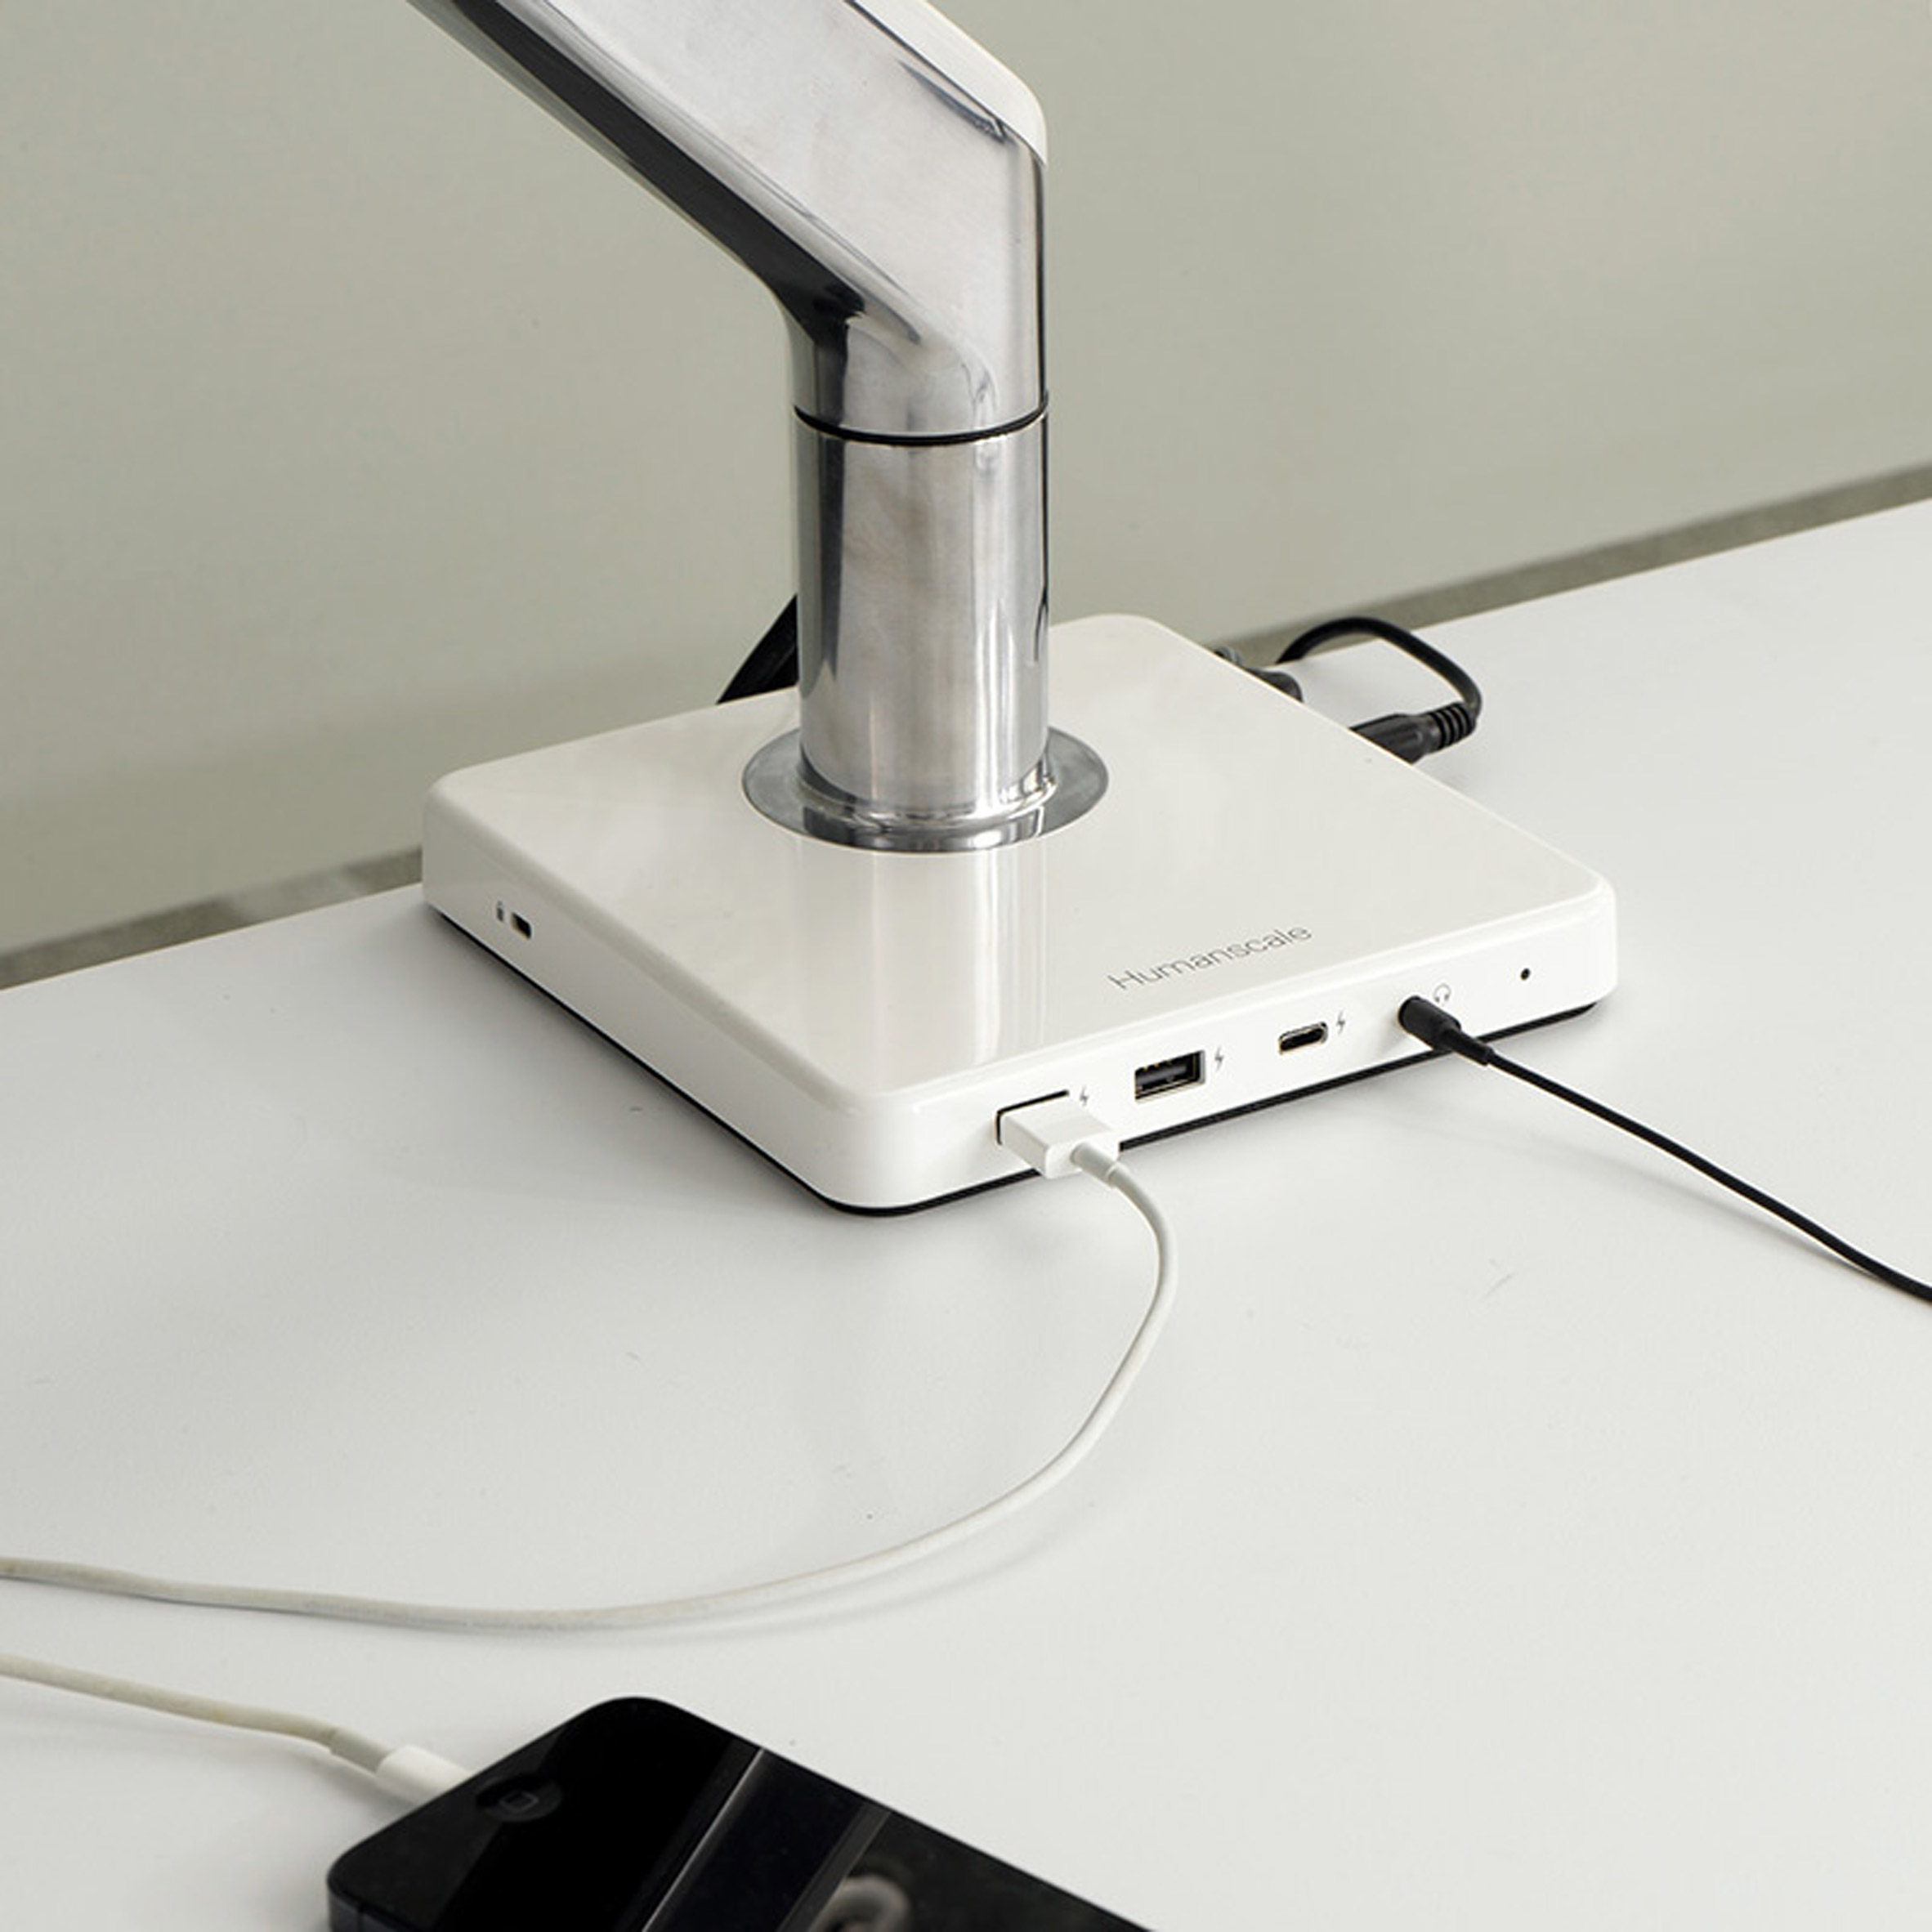 White device on white table with phone charging while connected to it